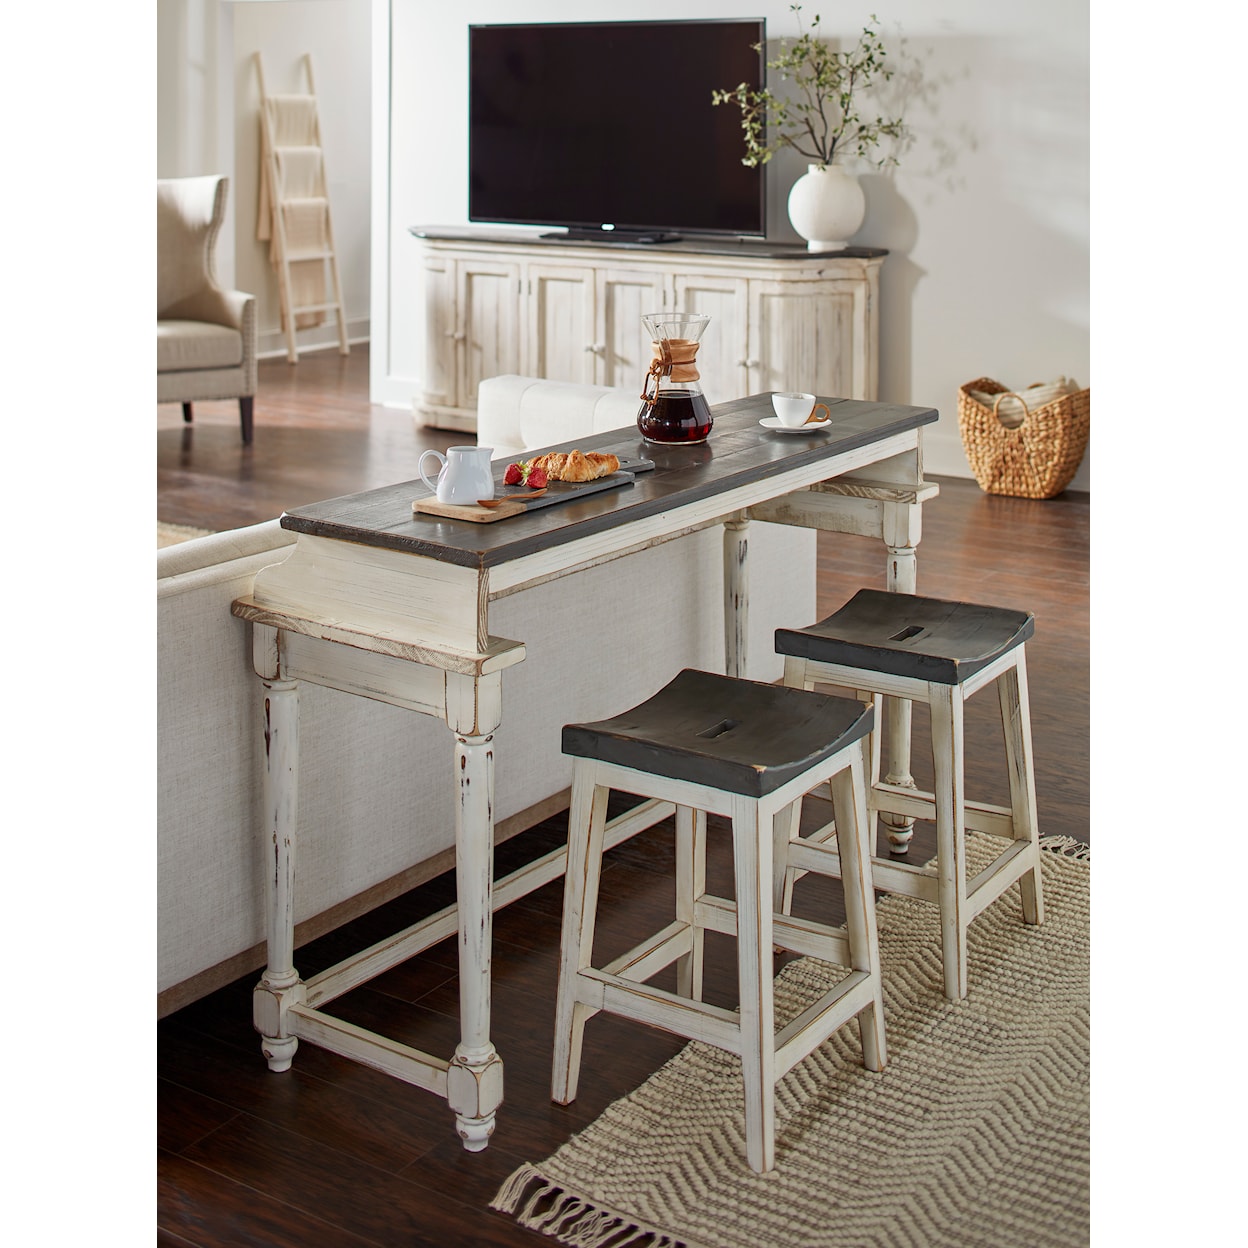 Aspenhome Hinsdale Console Bar Table with Two Stools